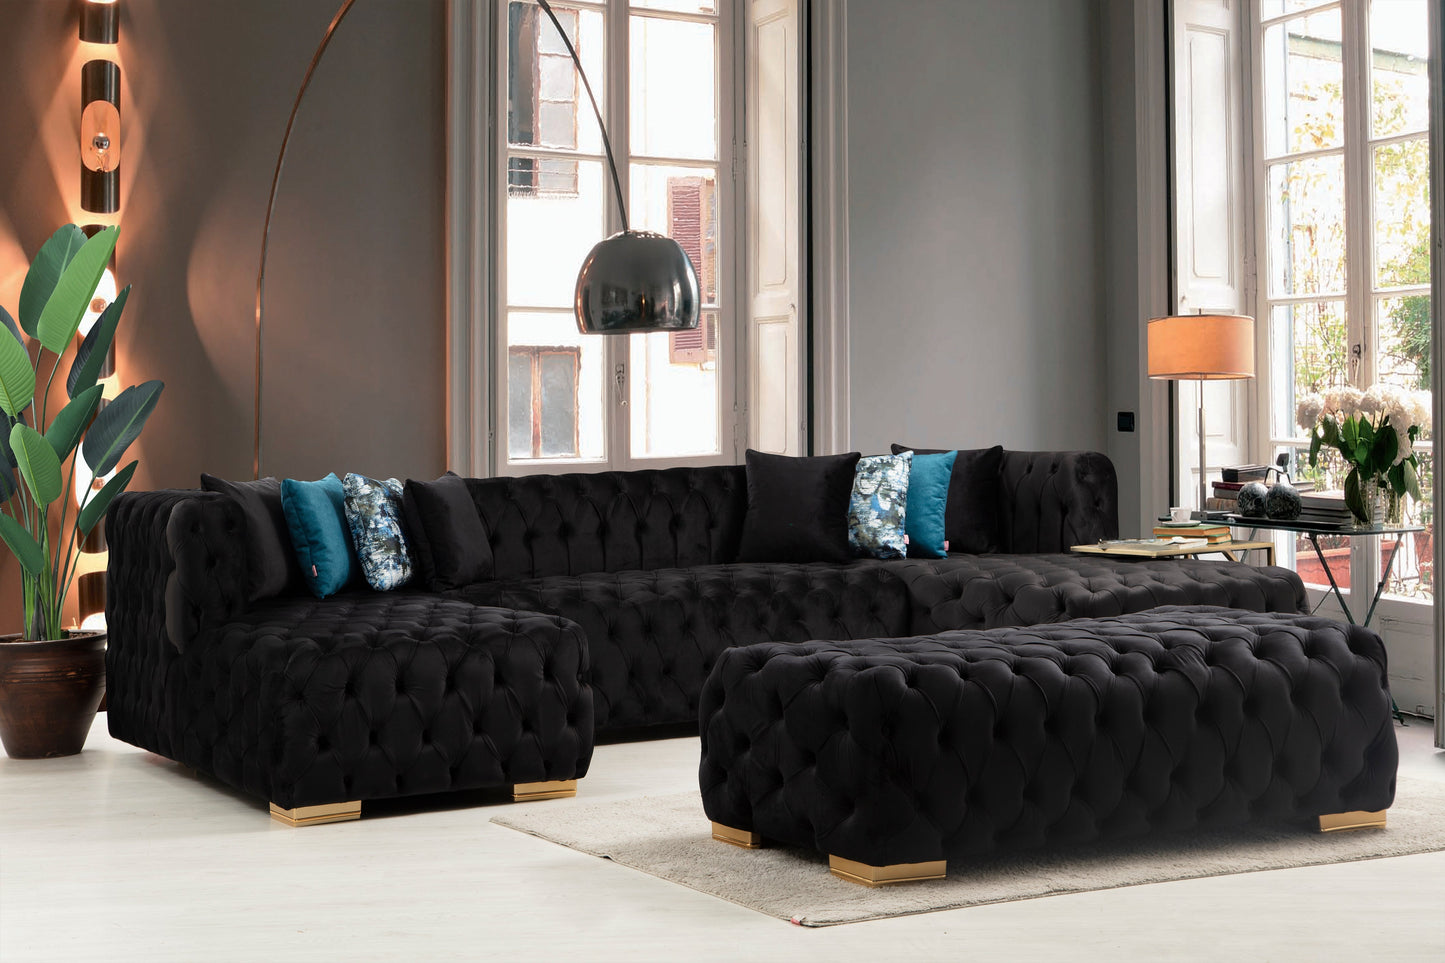 Golf Double Chase Sectional - Velvet  Navy Blue** OTTOMAN NOT INCLUDED**